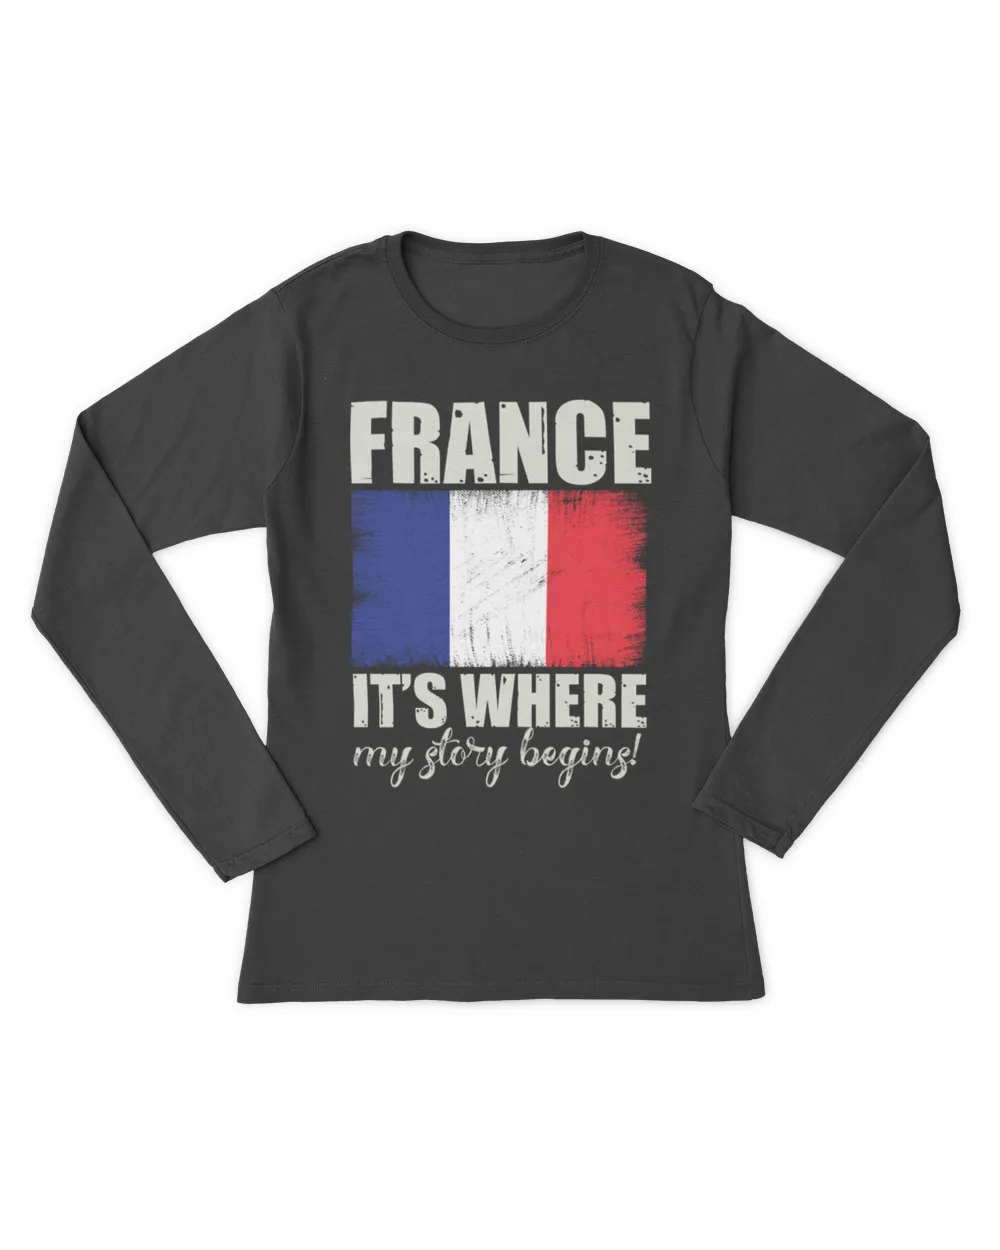 Proud France patriotic, cool gift for France citizen